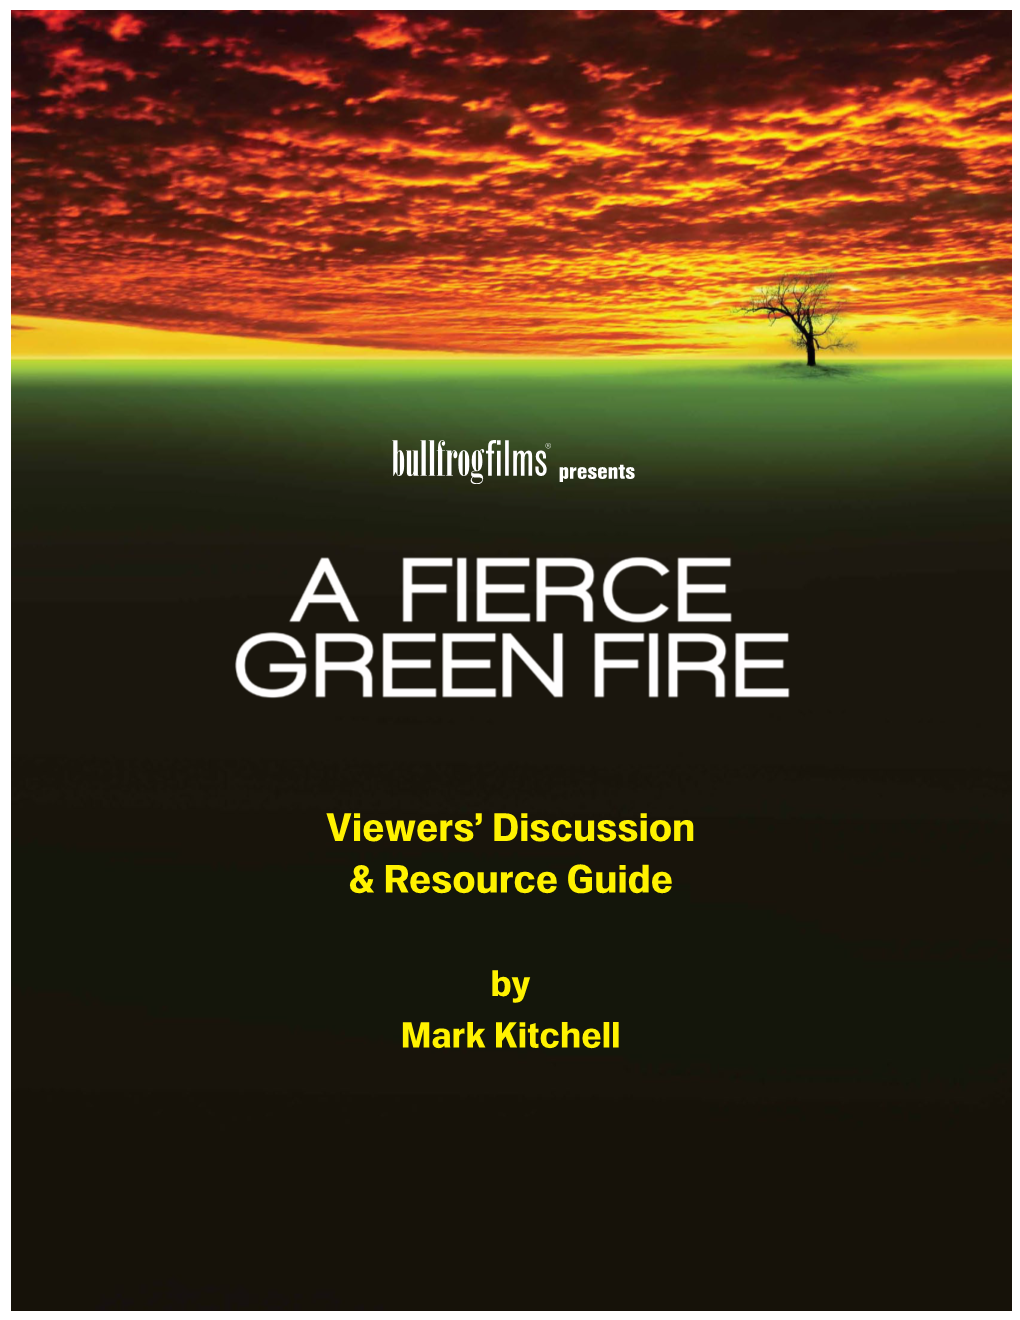 A Fierce Green Fire Start- Ed with the Idea That a Big-Picture Synthesis of Environmentalism Was Needed